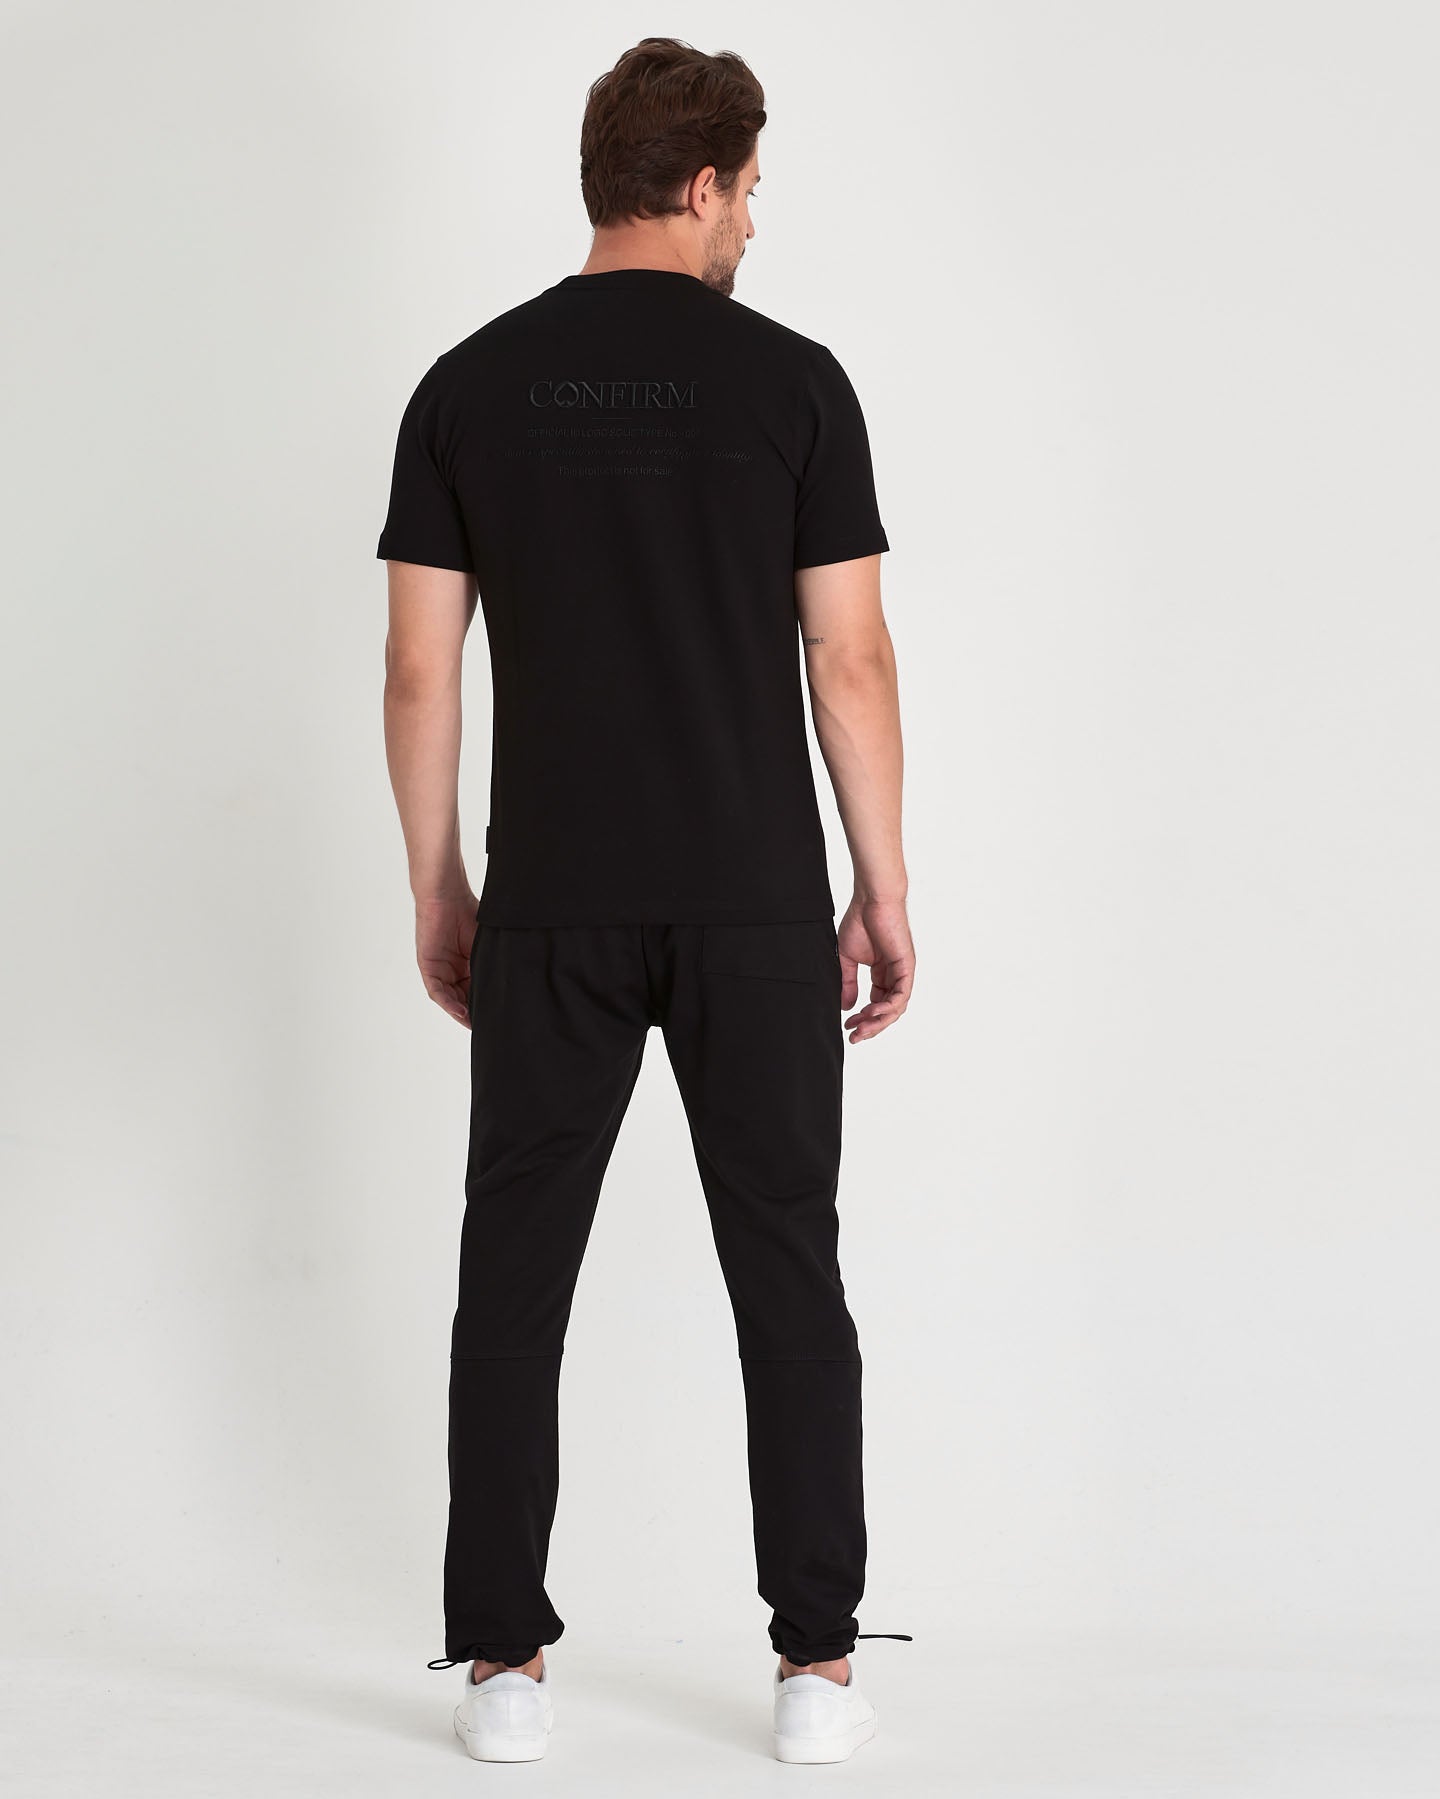 Soft solid T-shirt fitted | black